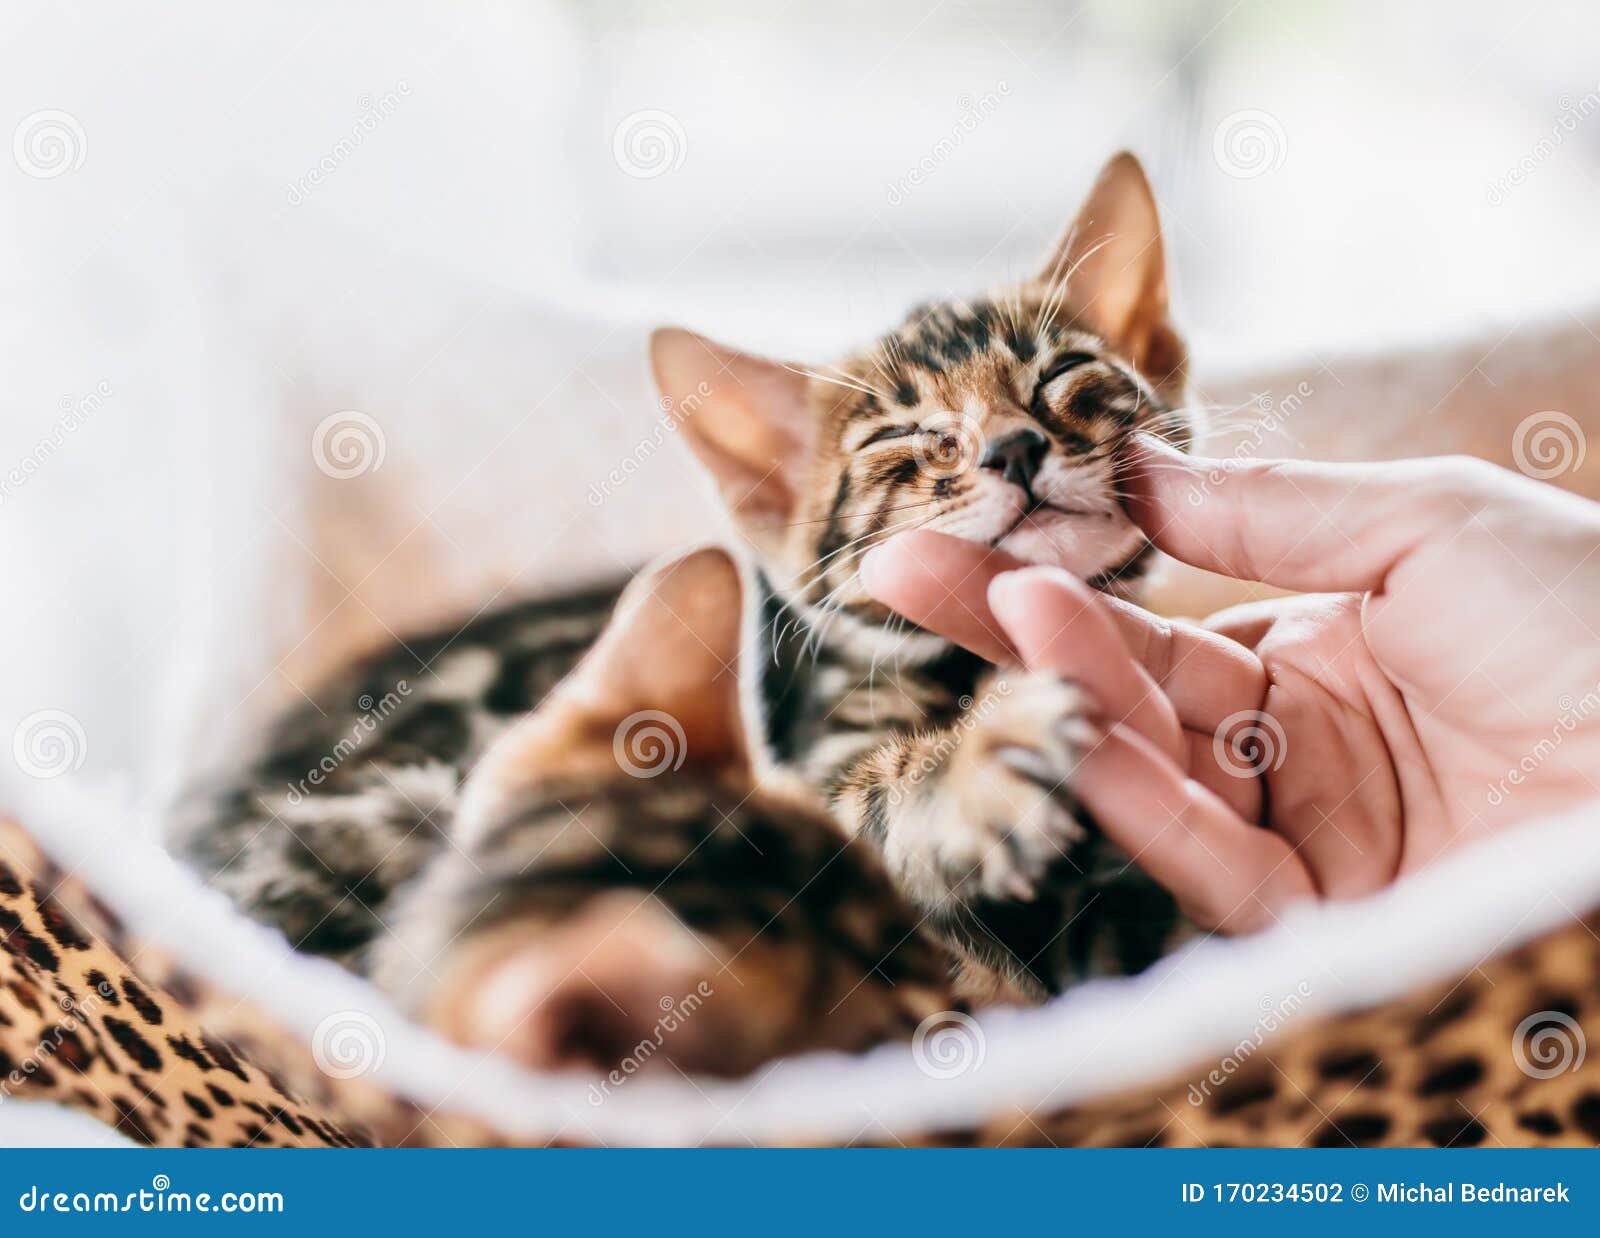 young bengal cat stroked under chin by a woman hand